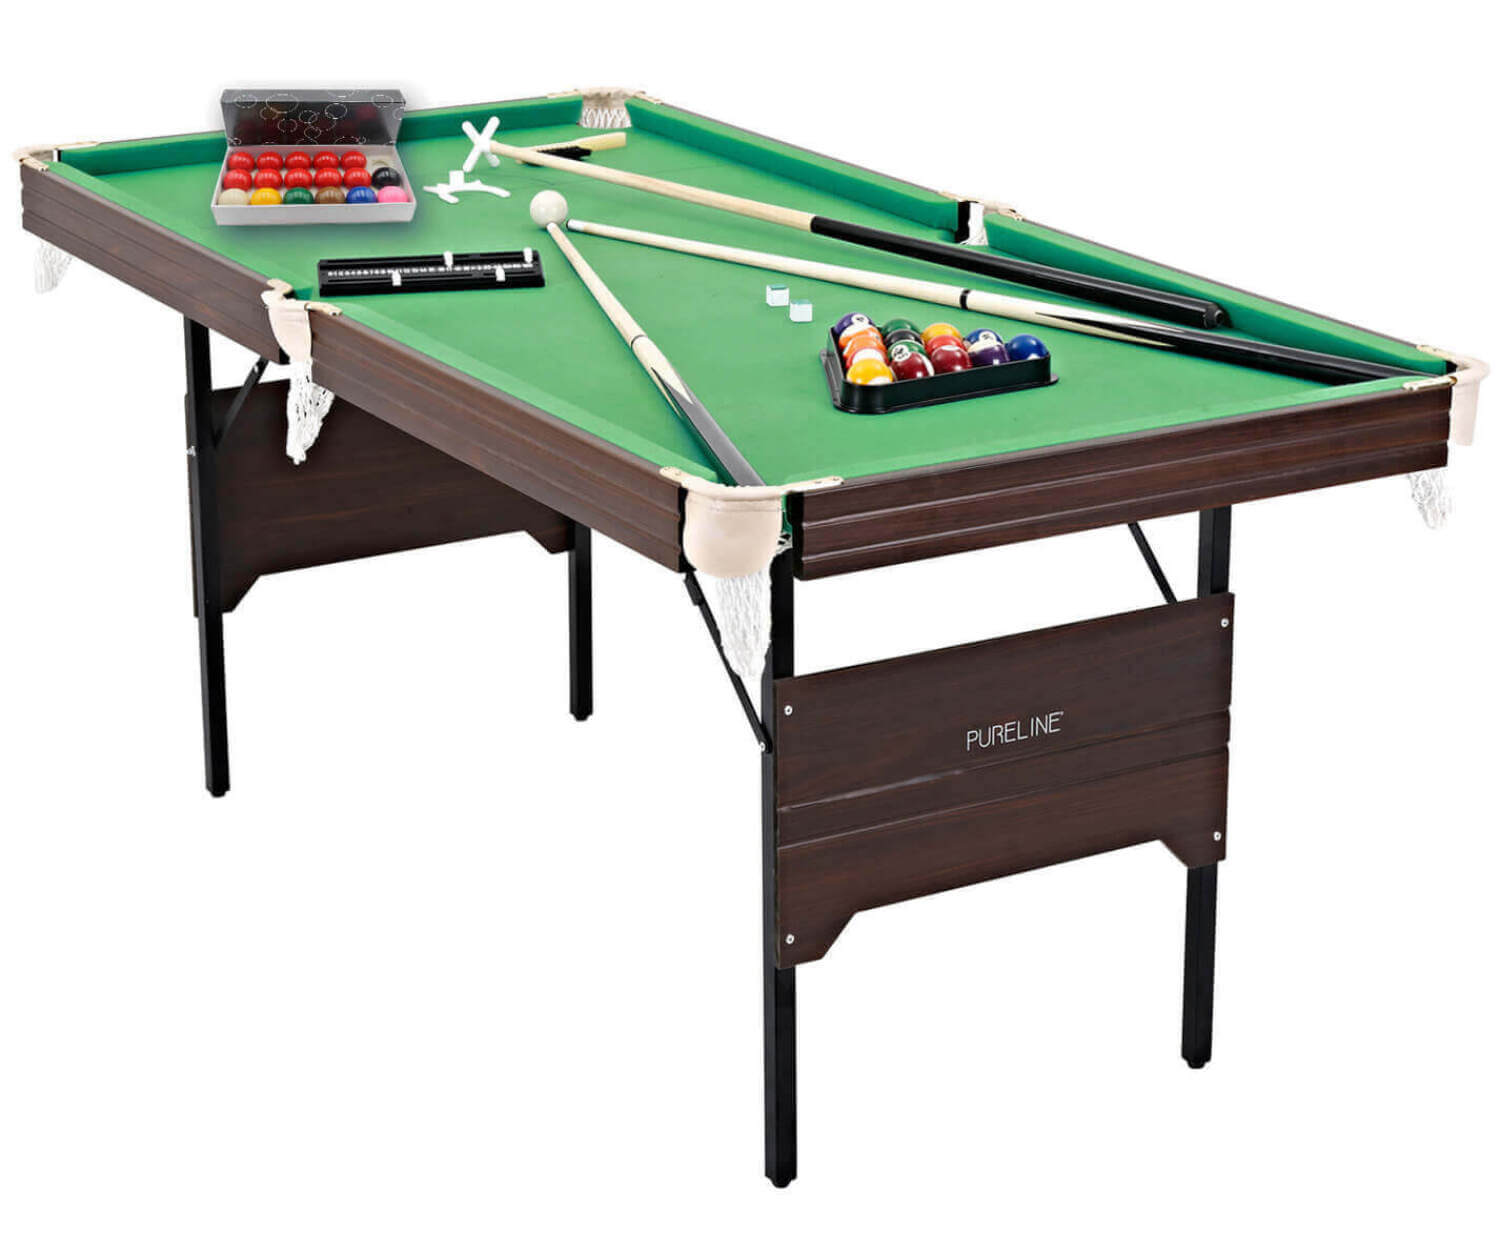 Pureline 6ft Folding Snooker & Pool Table | Liberty Games